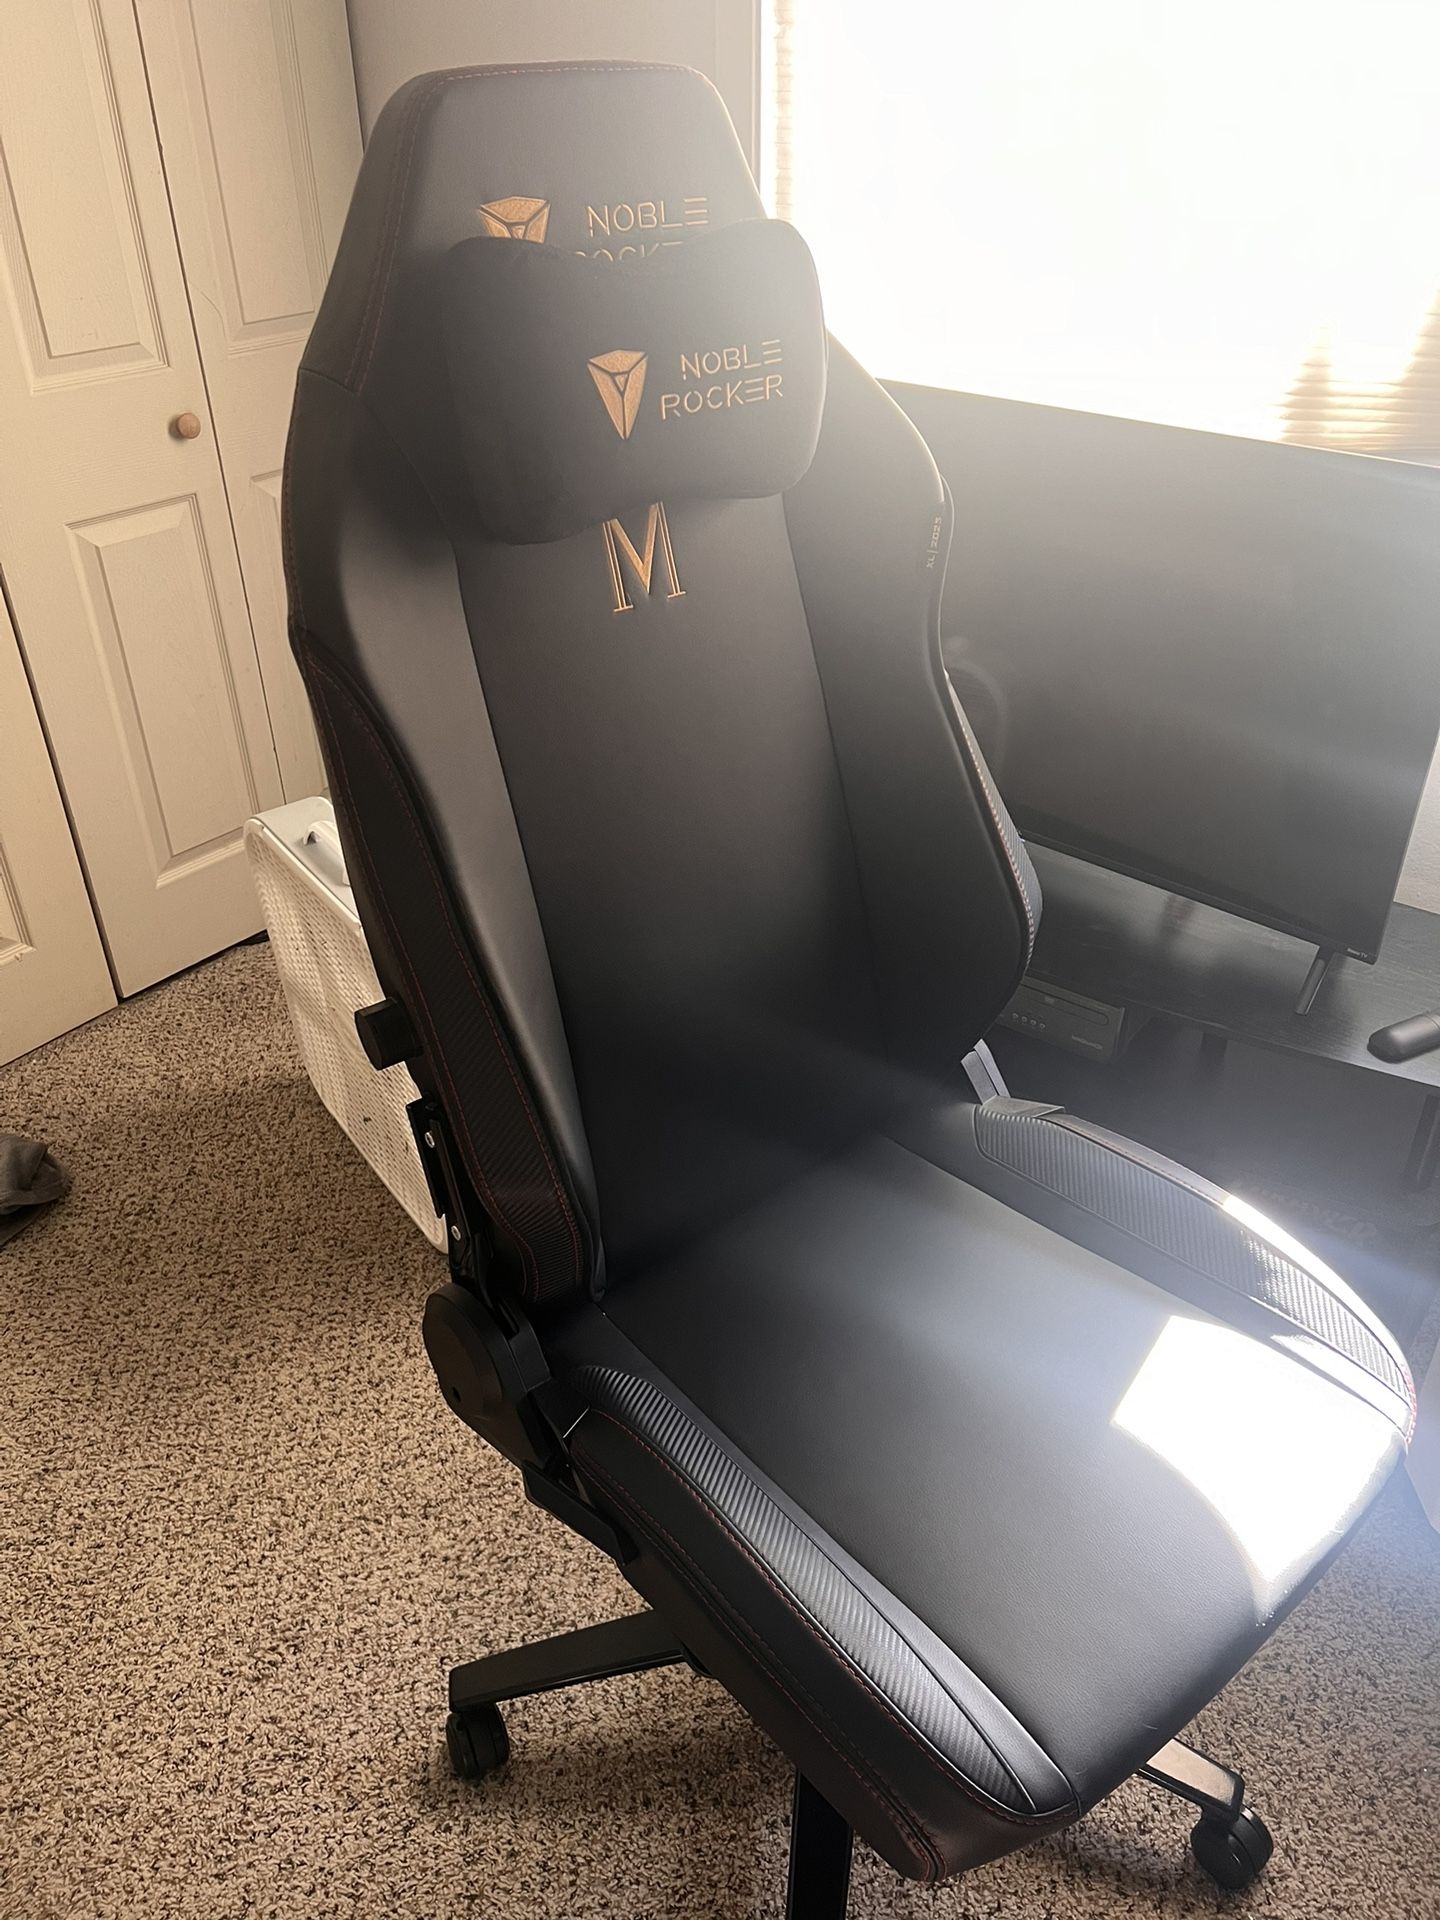 Gaming Chair/Office Chair